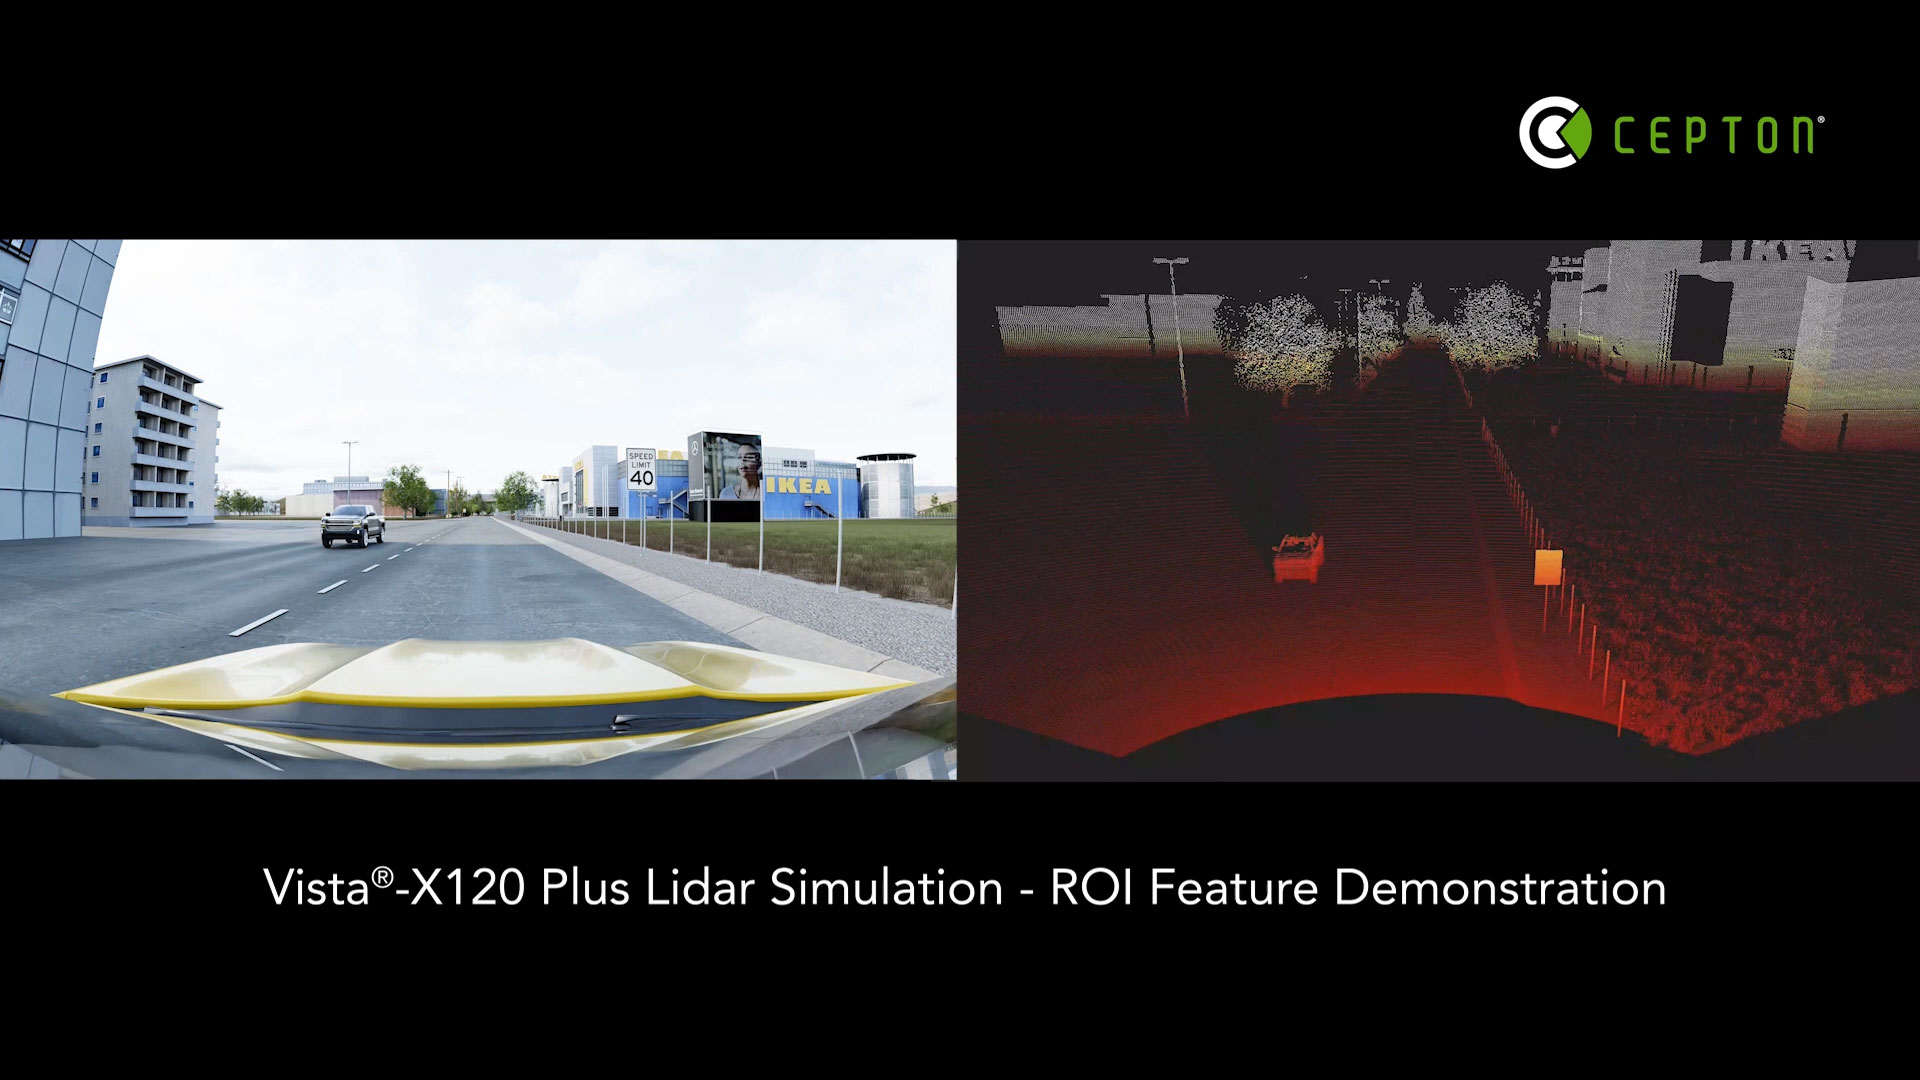 The video features simulated point clouds generated from a Vista-X120 Plus sensor integrated into the roof of the ego vehicle, with the software-definable ROI feature demonstrated. © Cepton, Inc.